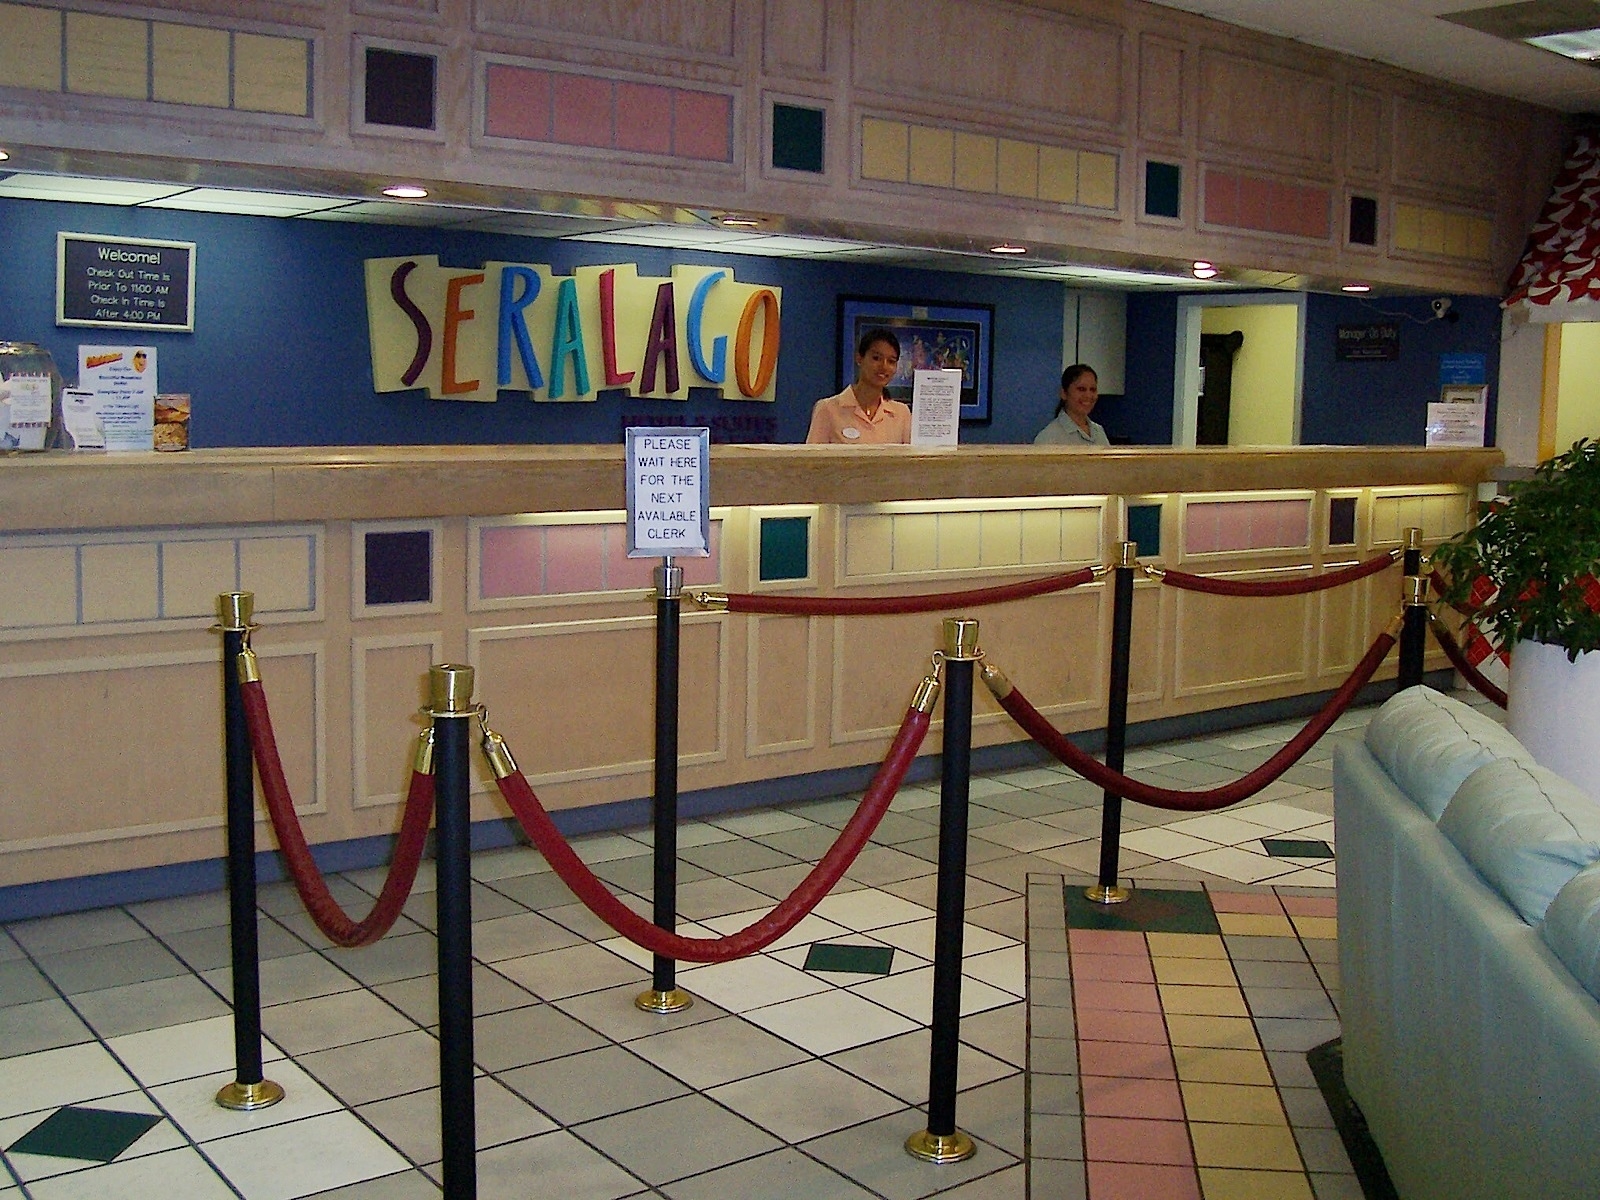 Welcome and reception desk at Seralago Hotel & Spa